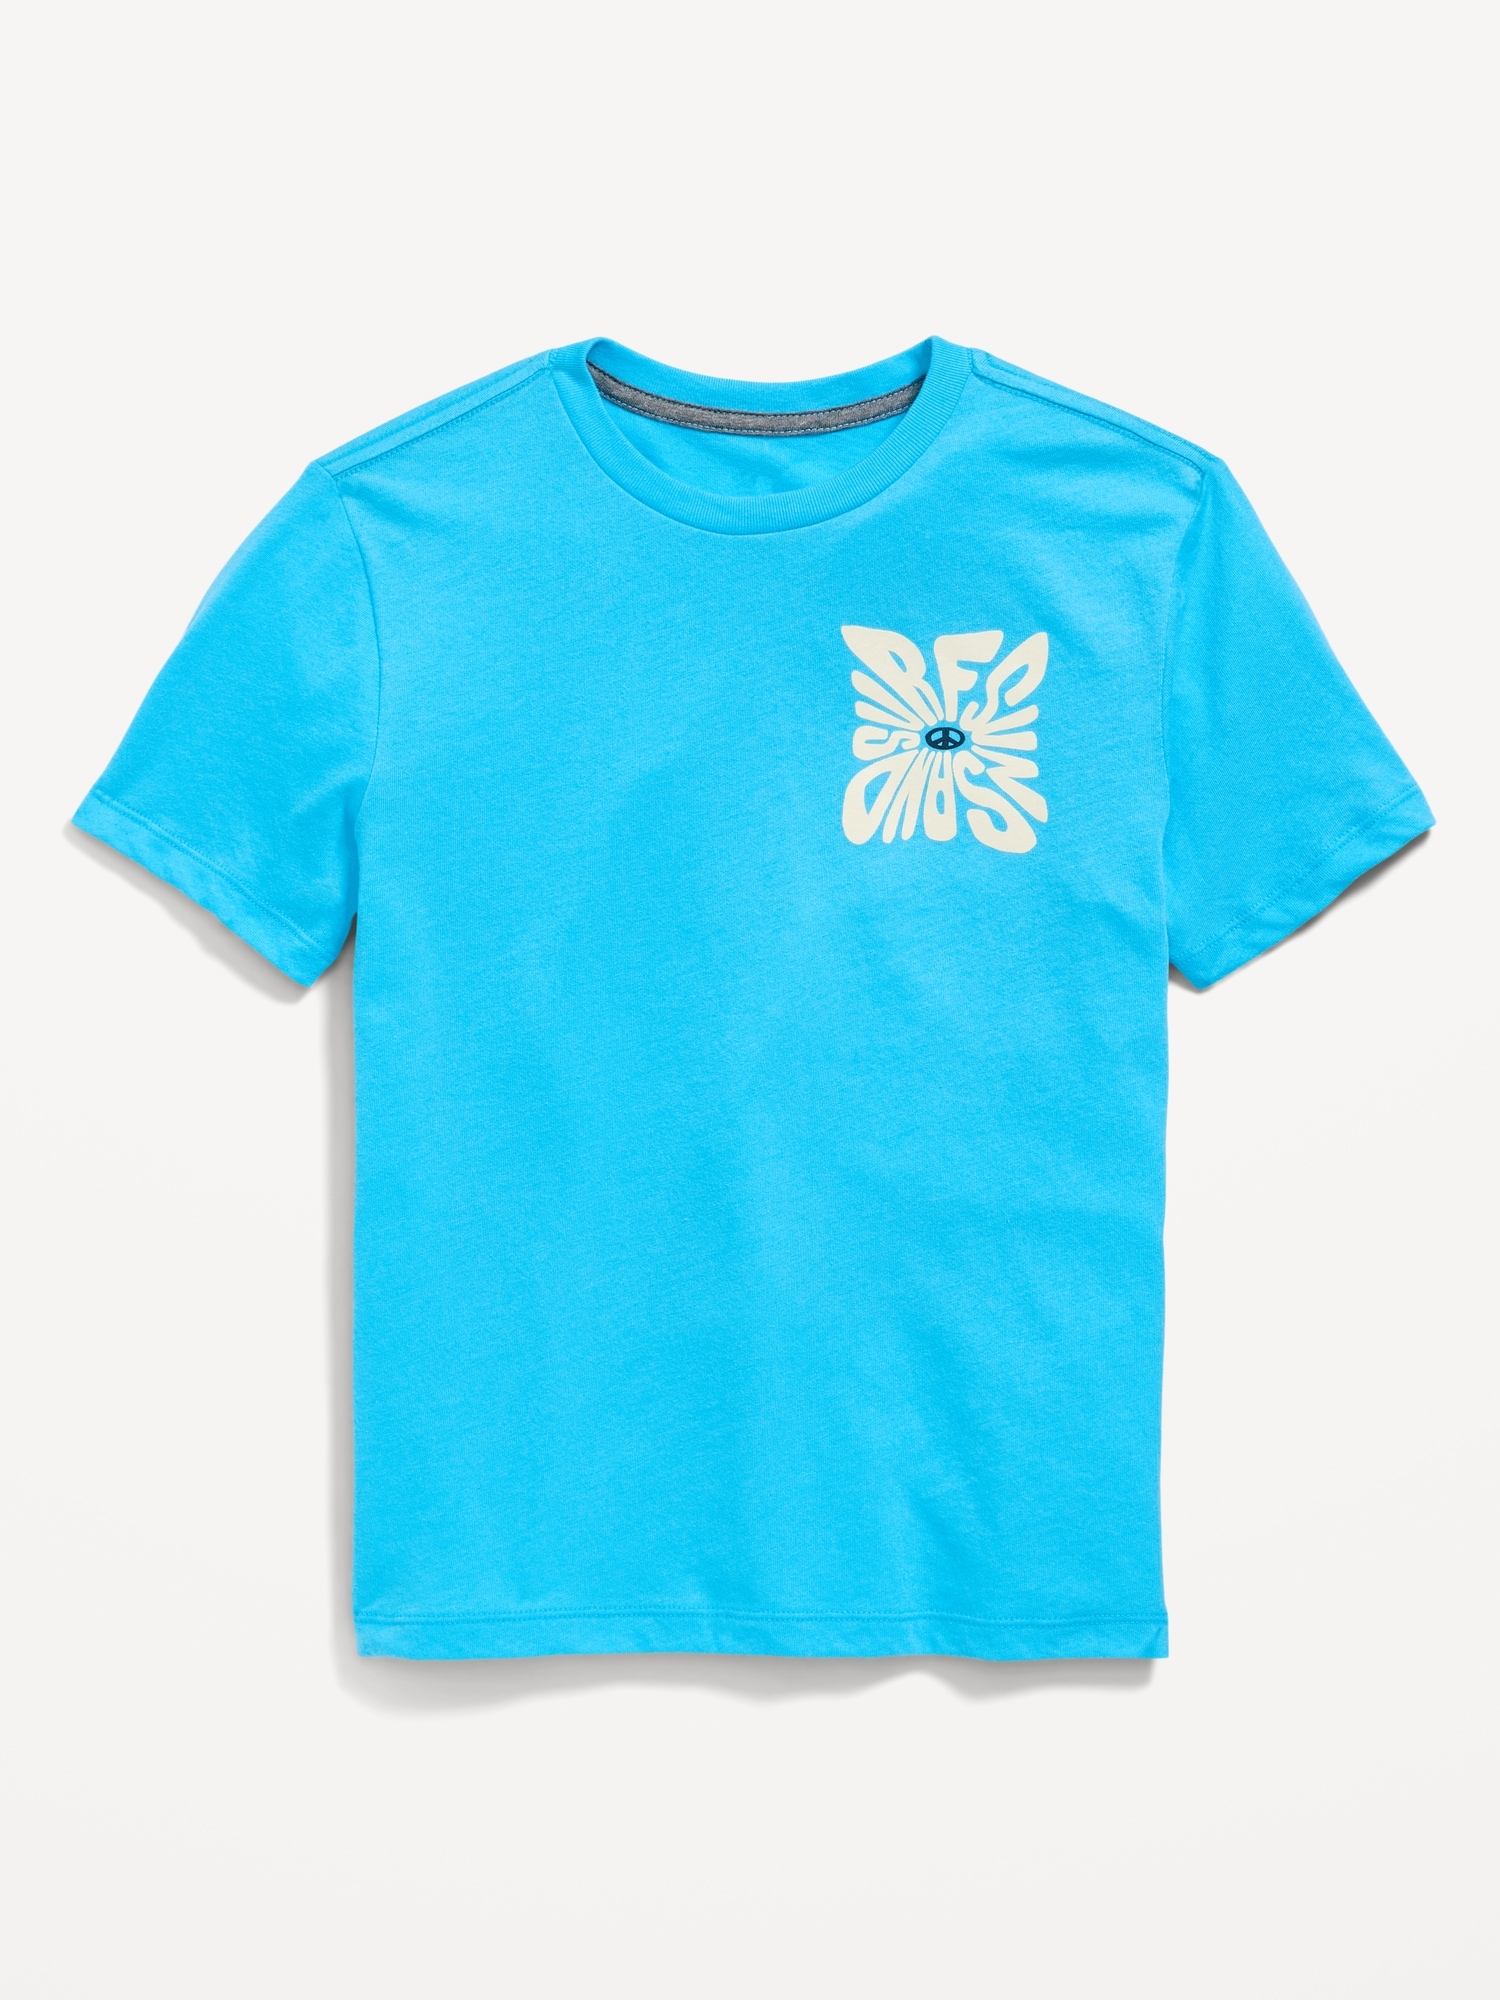 Old Navy Graphic Crew-Neck T-Shirt for Boys blue. 1